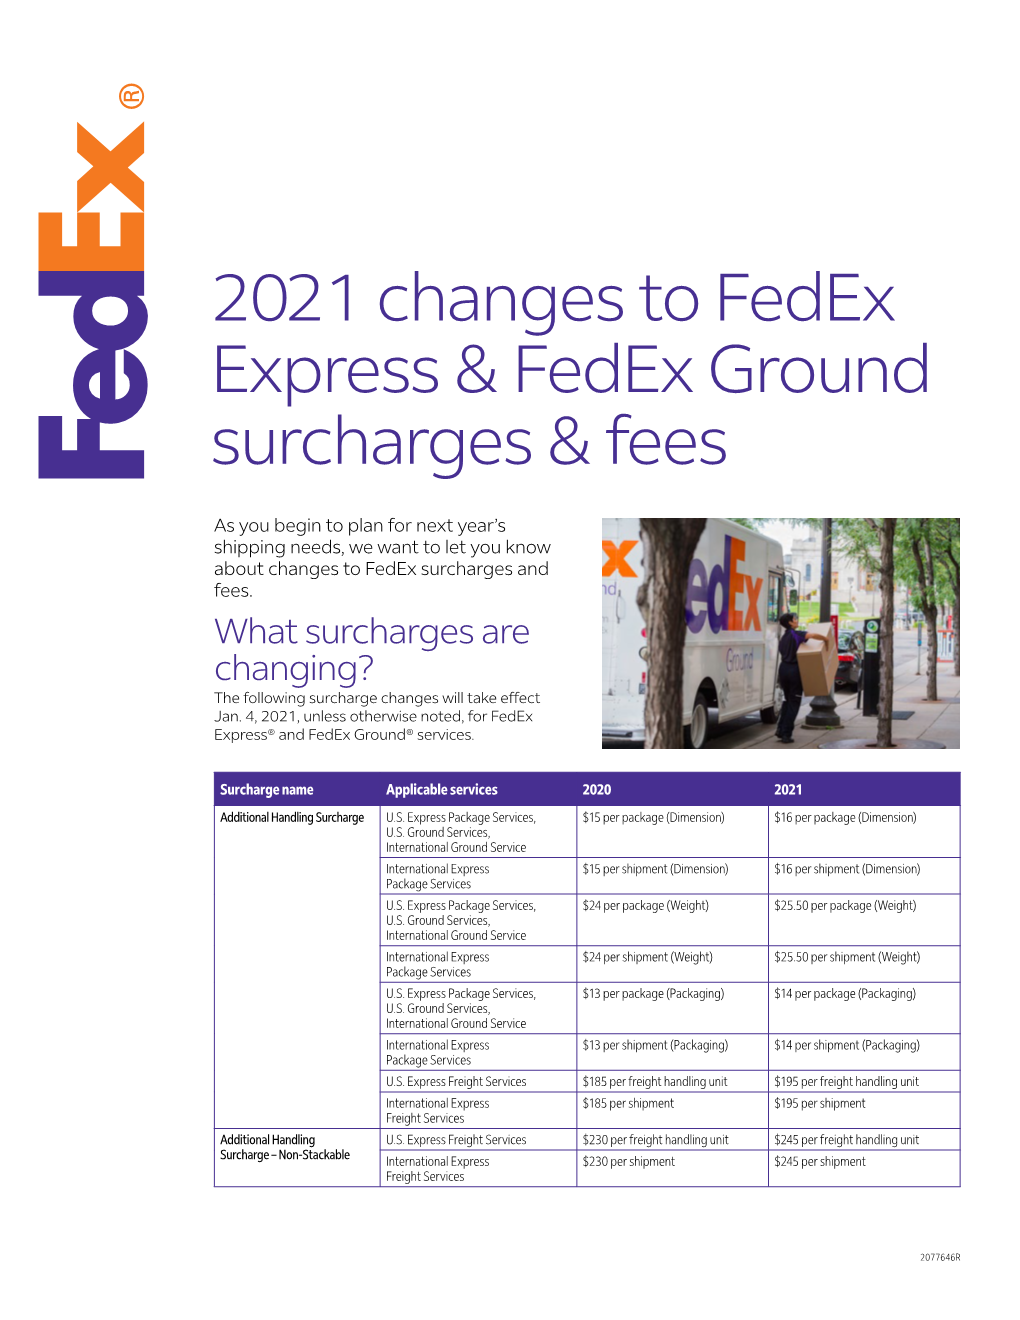 2021 Changes to Fedex Express & Fedex Ground Surcharges & Fees